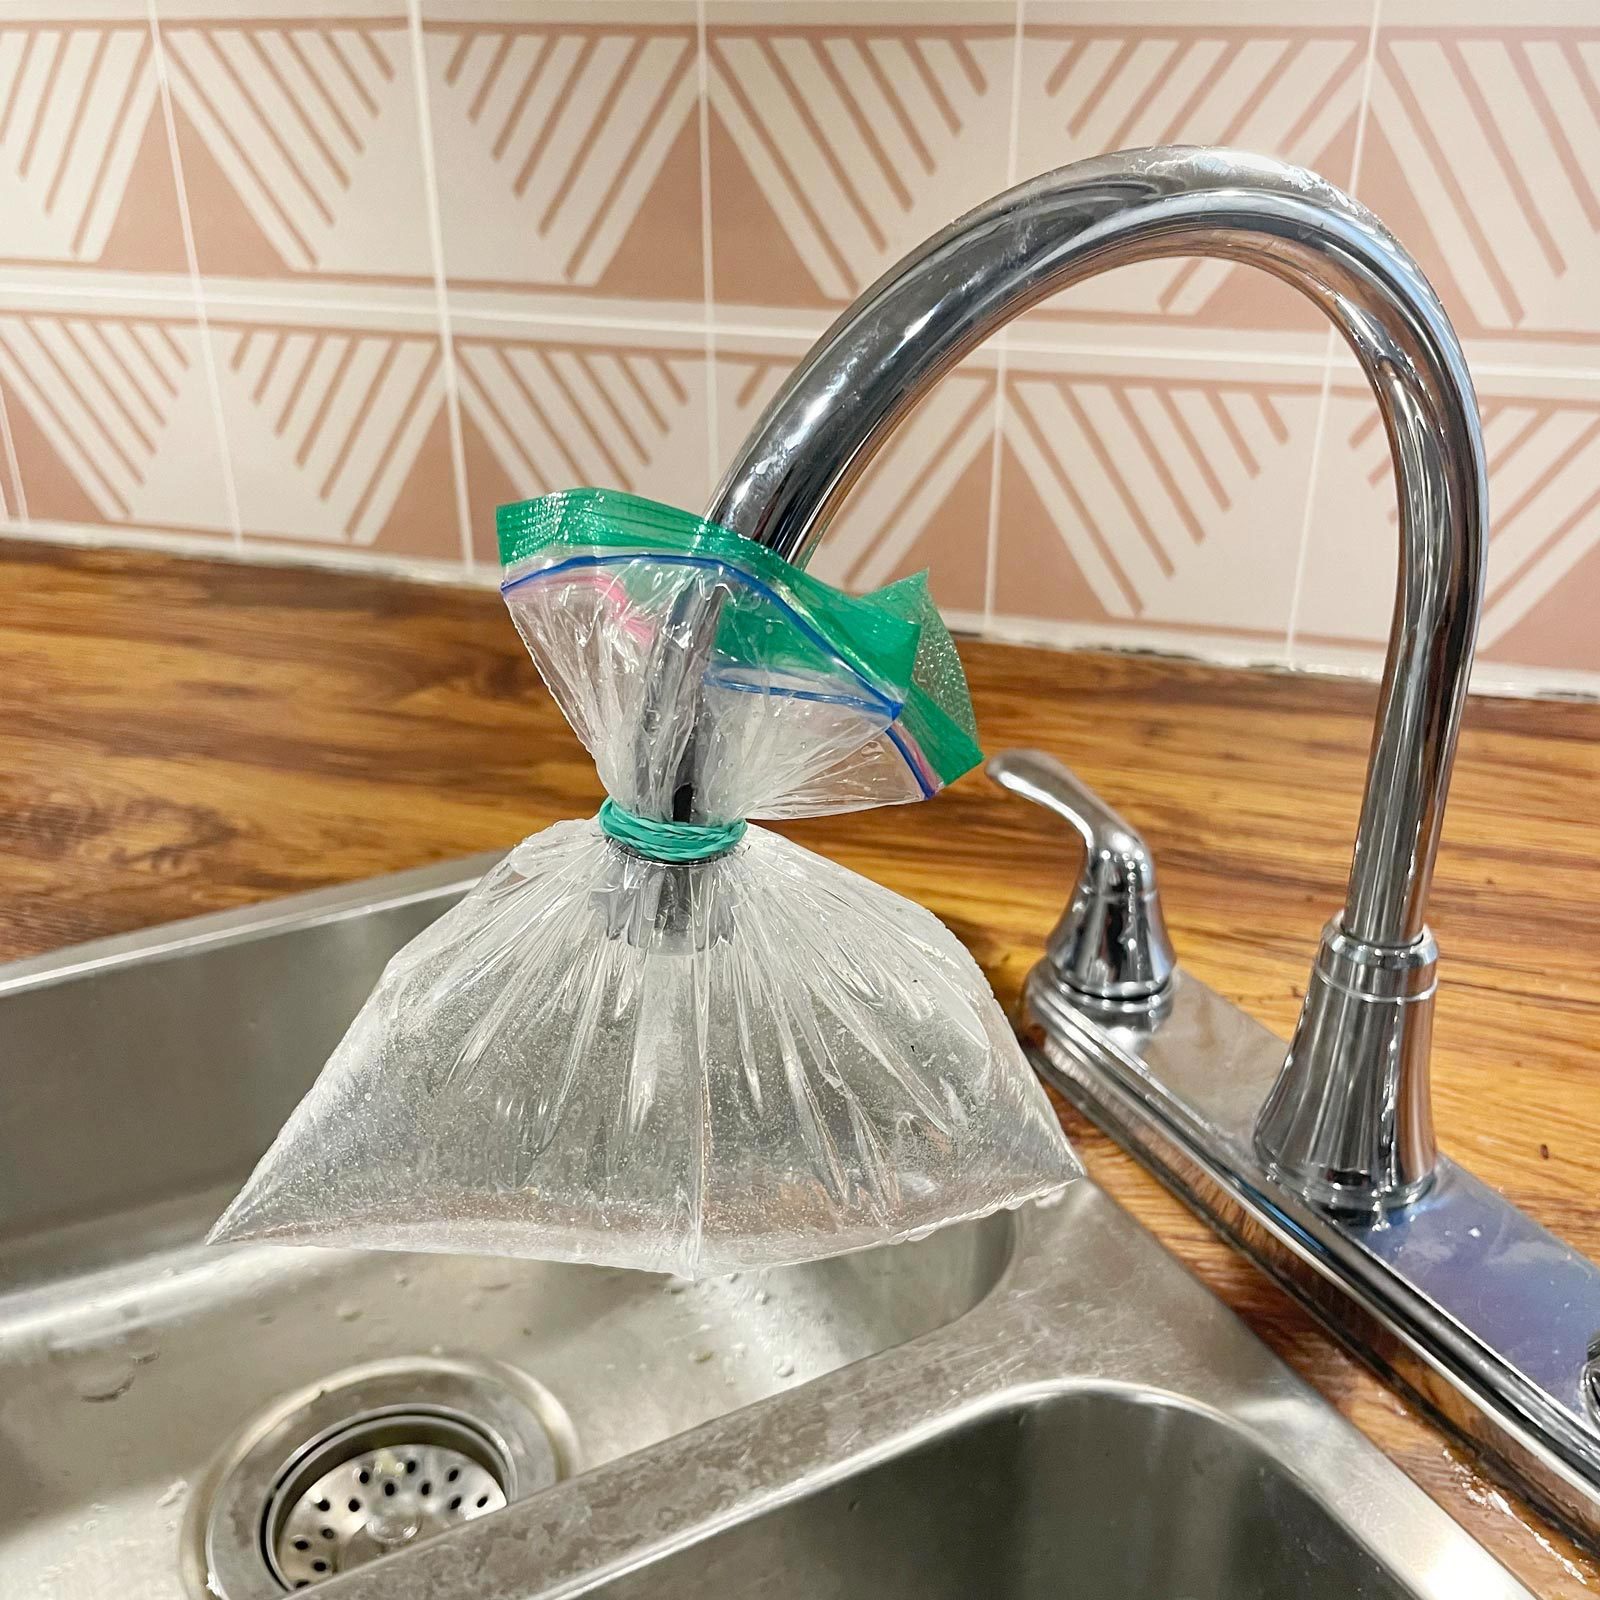 a plastic bag filled with vinegar being held onto a kitchen sink faucet with a rubber band